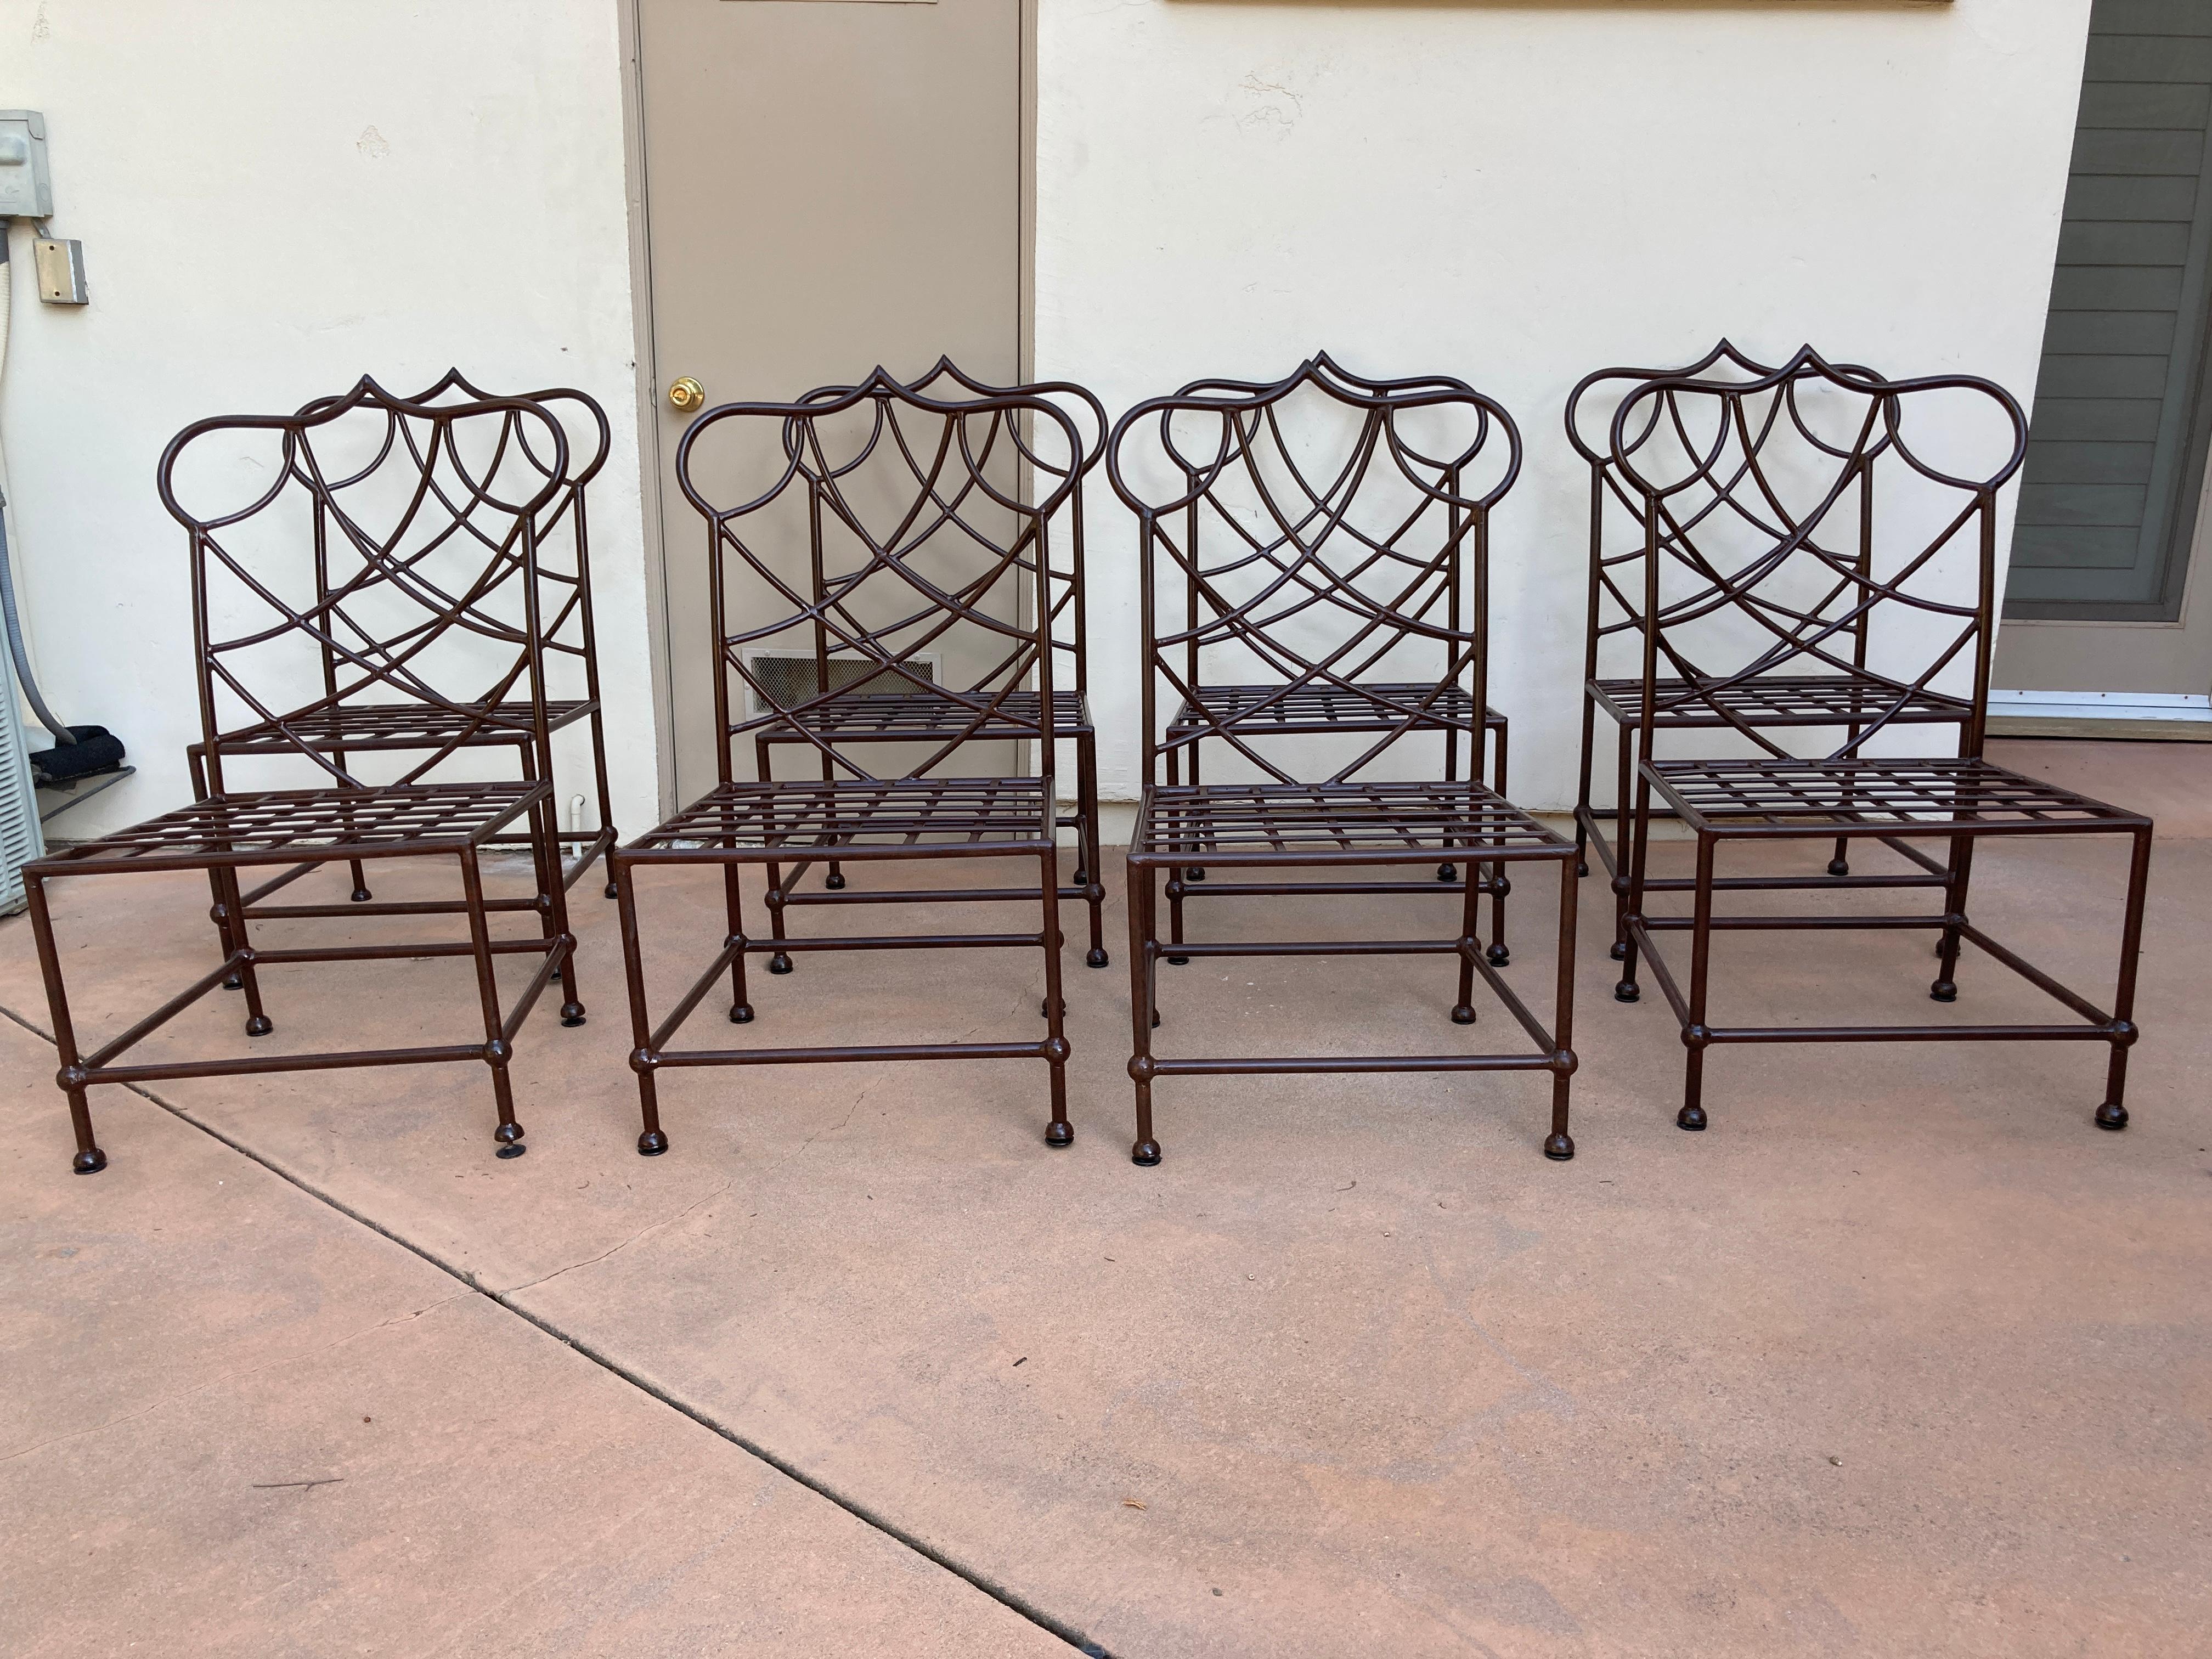 Custom made outdoor metal chairs set of eight, powder coated with rust iron color.
One of a kind, large vintage chairs hand crafted custom found in a large estate in Santa Barbara.
Great Moorish arched back with openwork design.
The chairs have